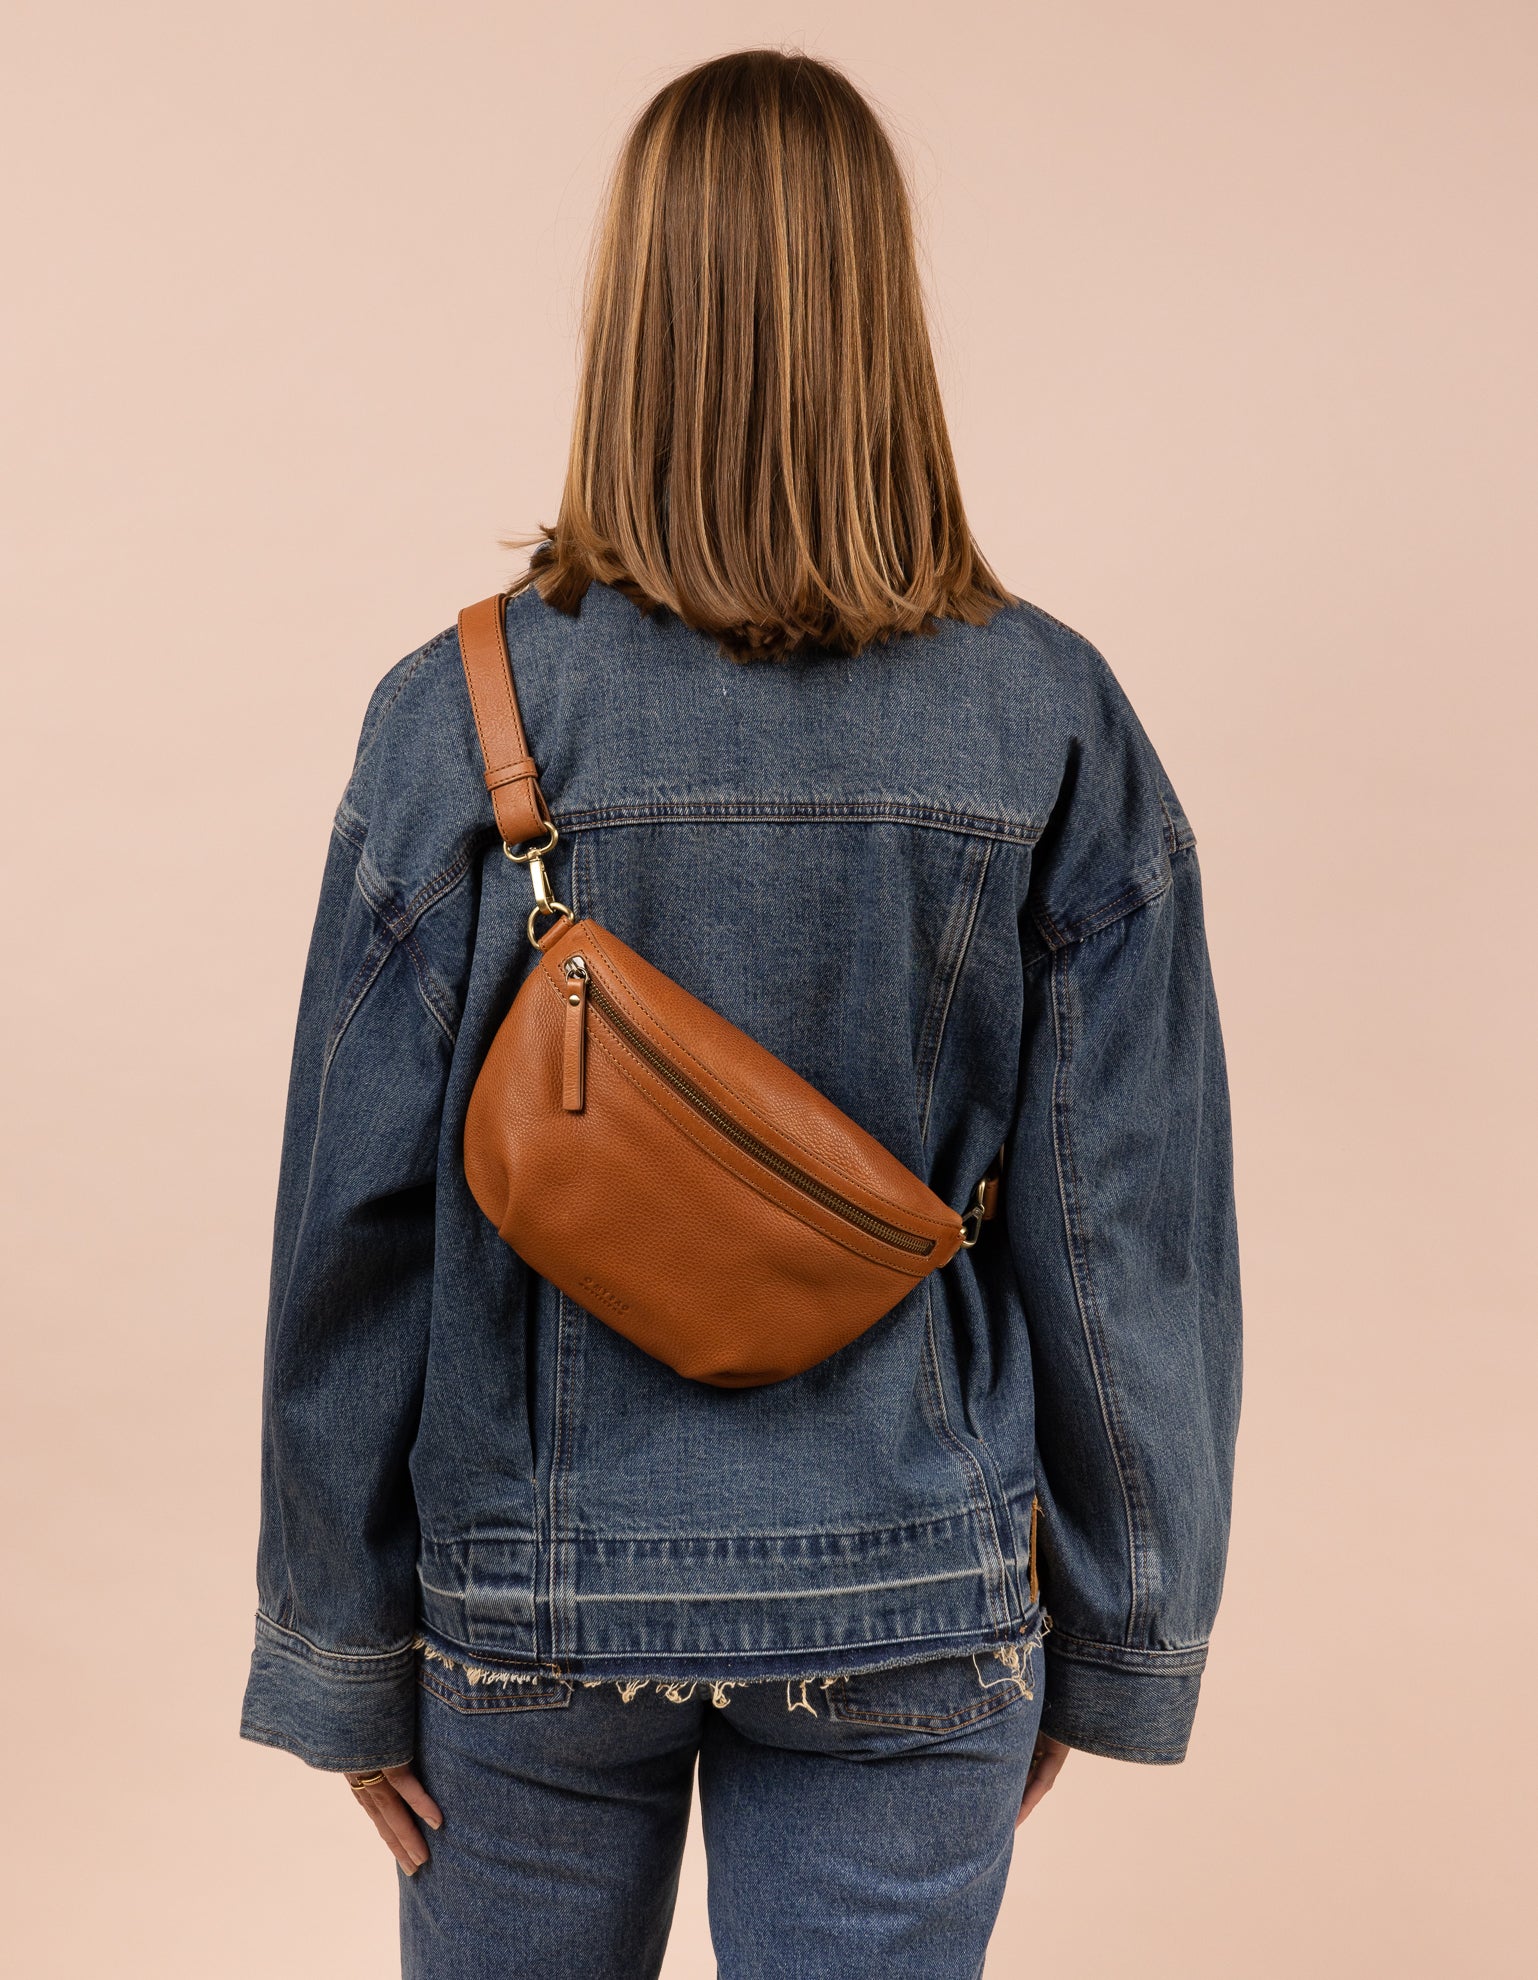 Brown soft leather bum bag worn cross-body on a model